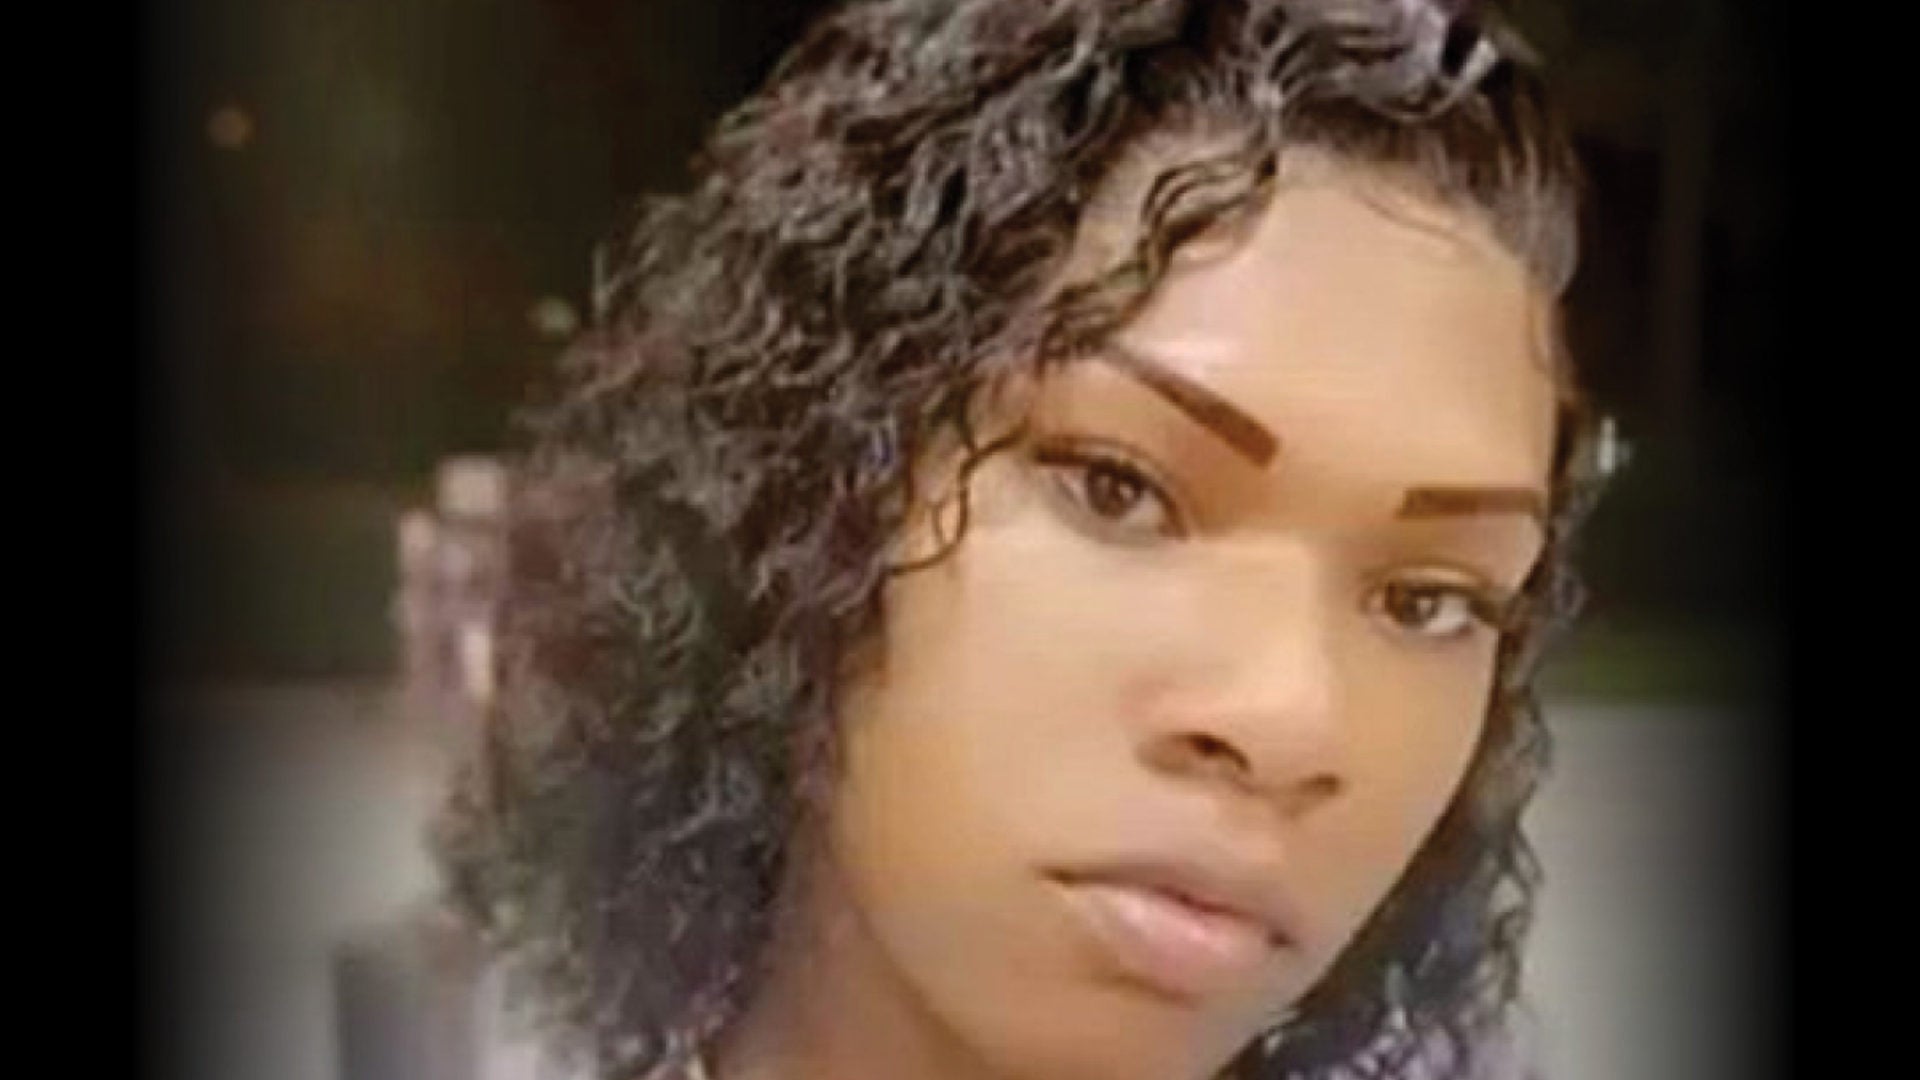 Black Trans Woman Found 'Burned Beyond Recognition' In Car In Florida